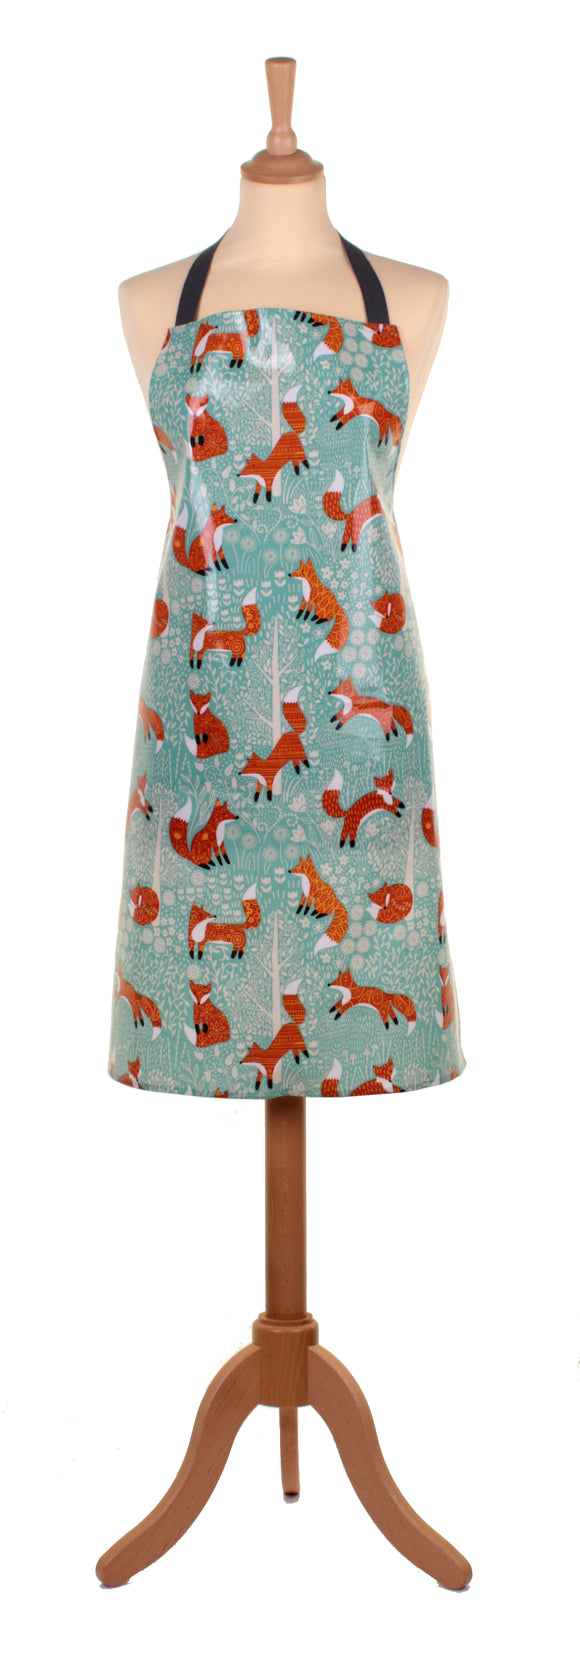 PVC Apron Foraging Fox by Ulster Weavers - Gifteasy Online